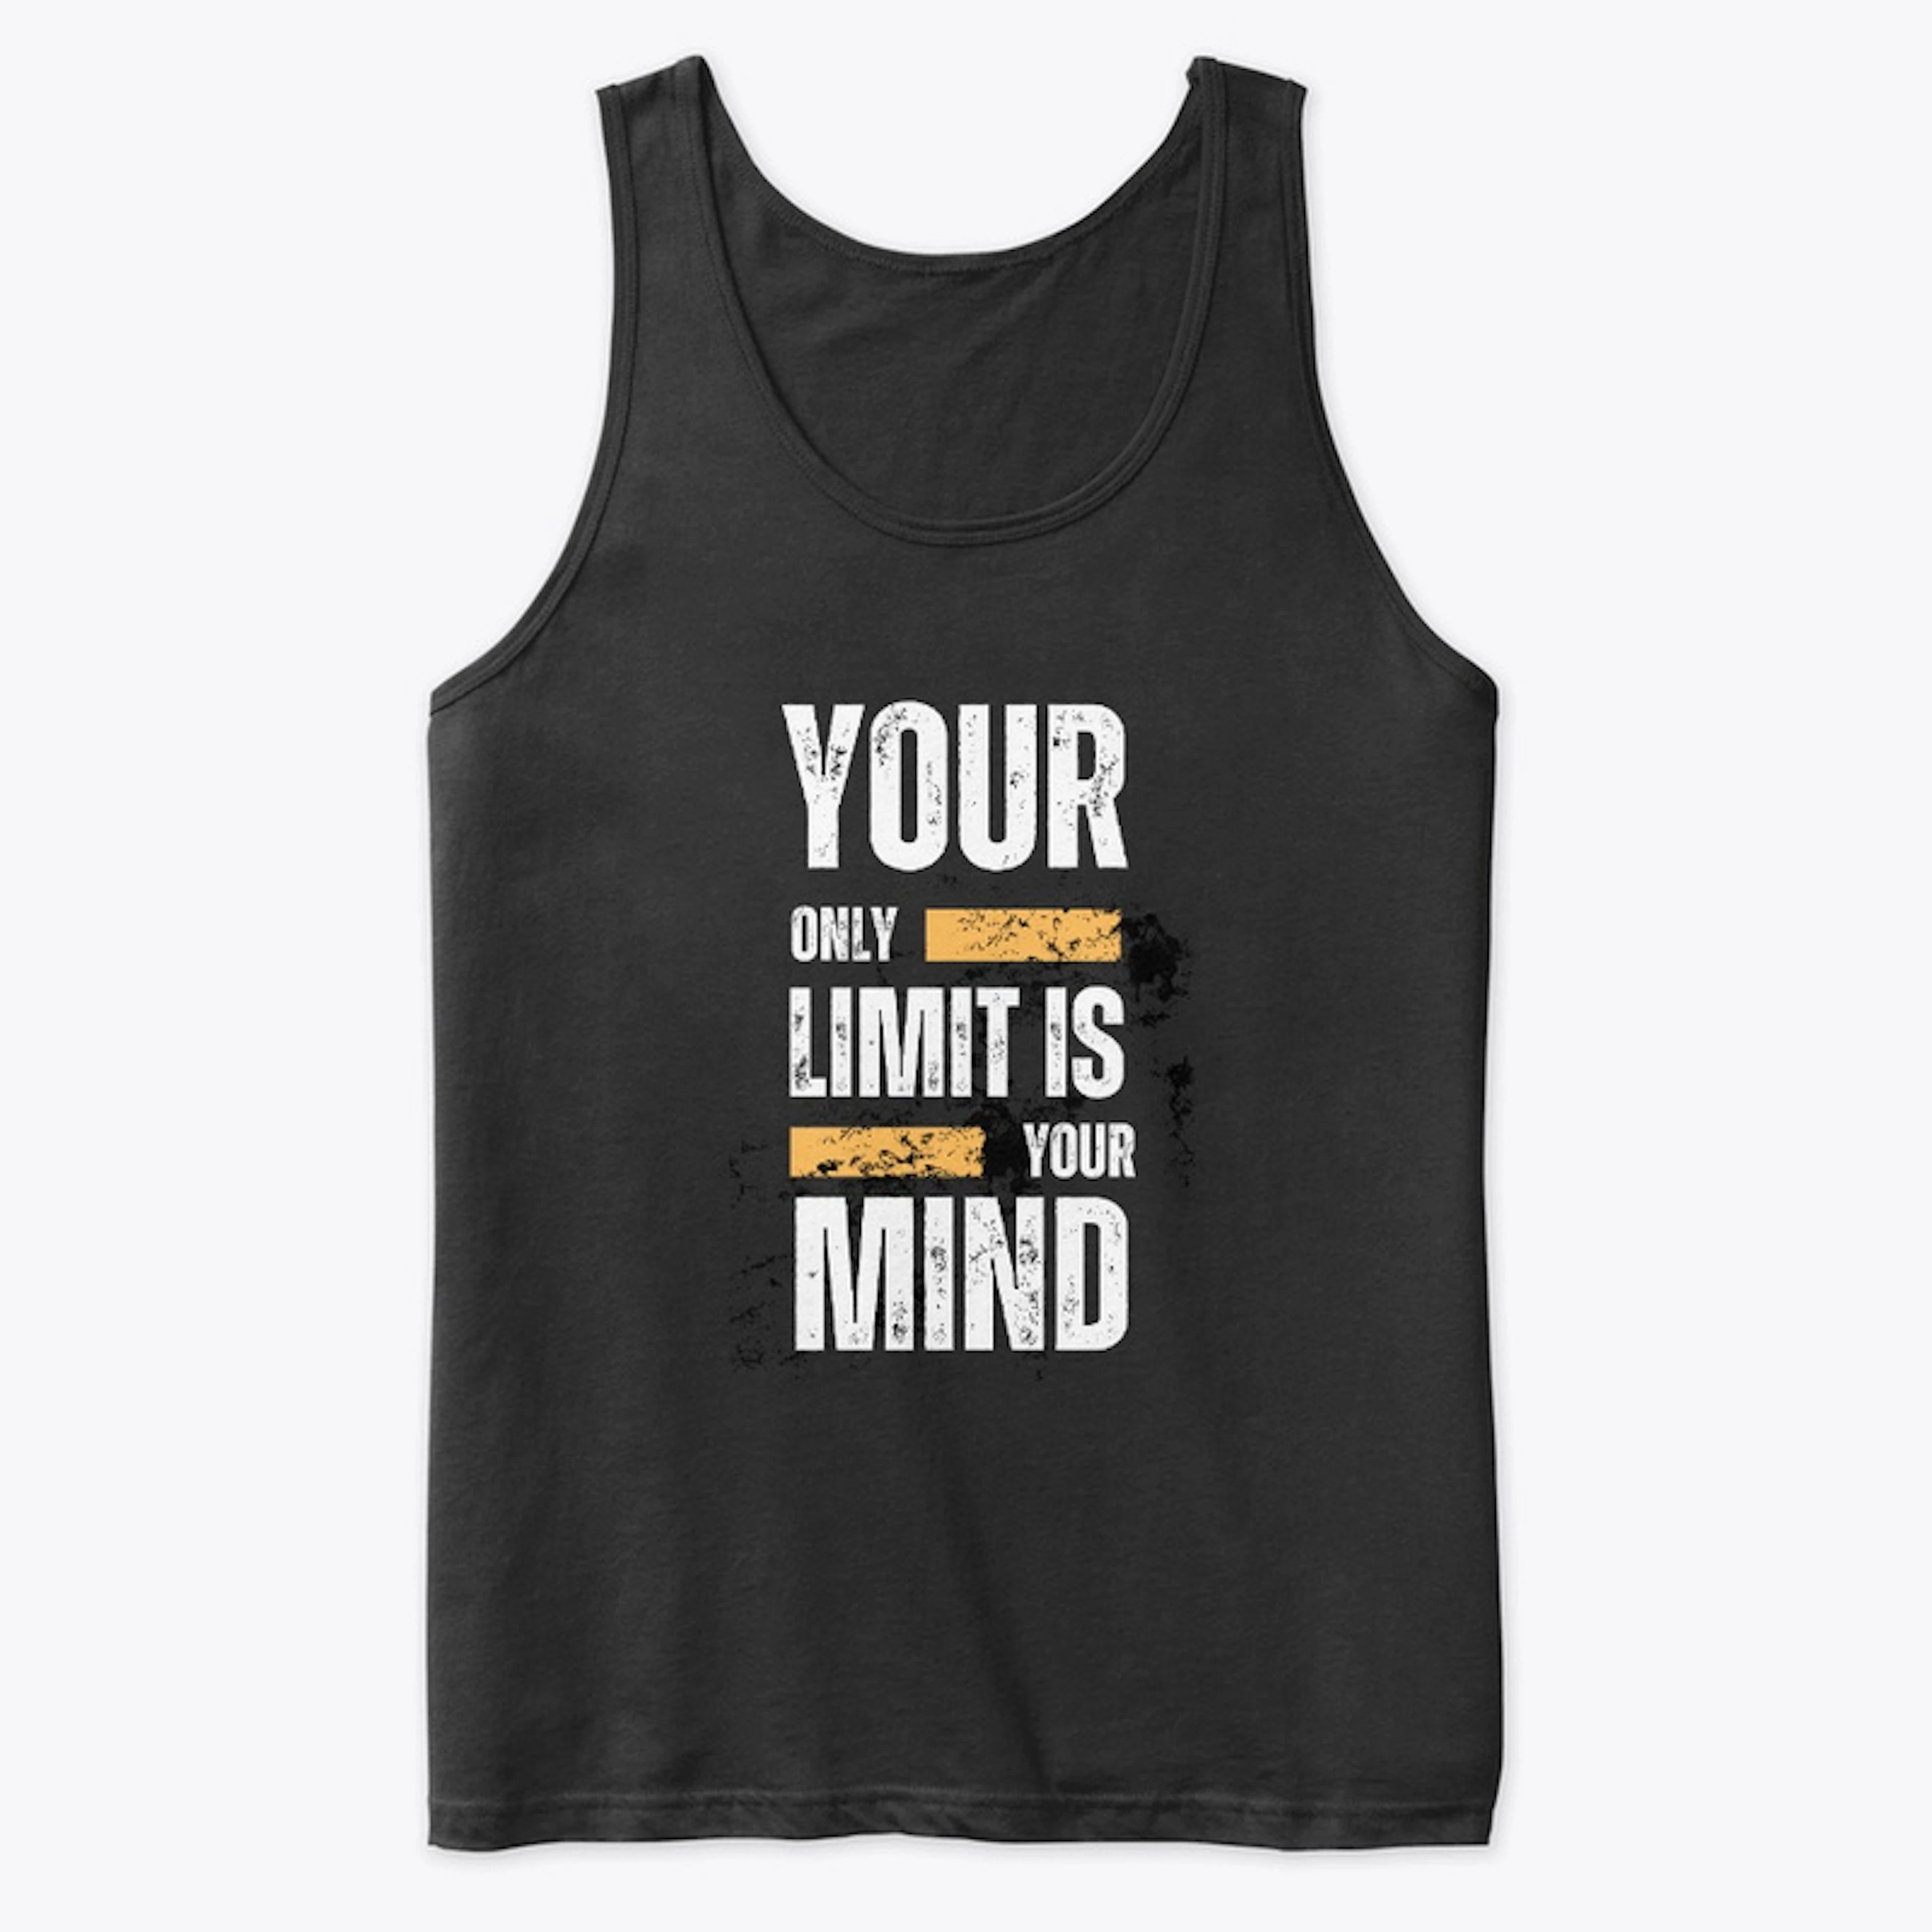 Beautiful Tank Top For Fitness Lovers!!!